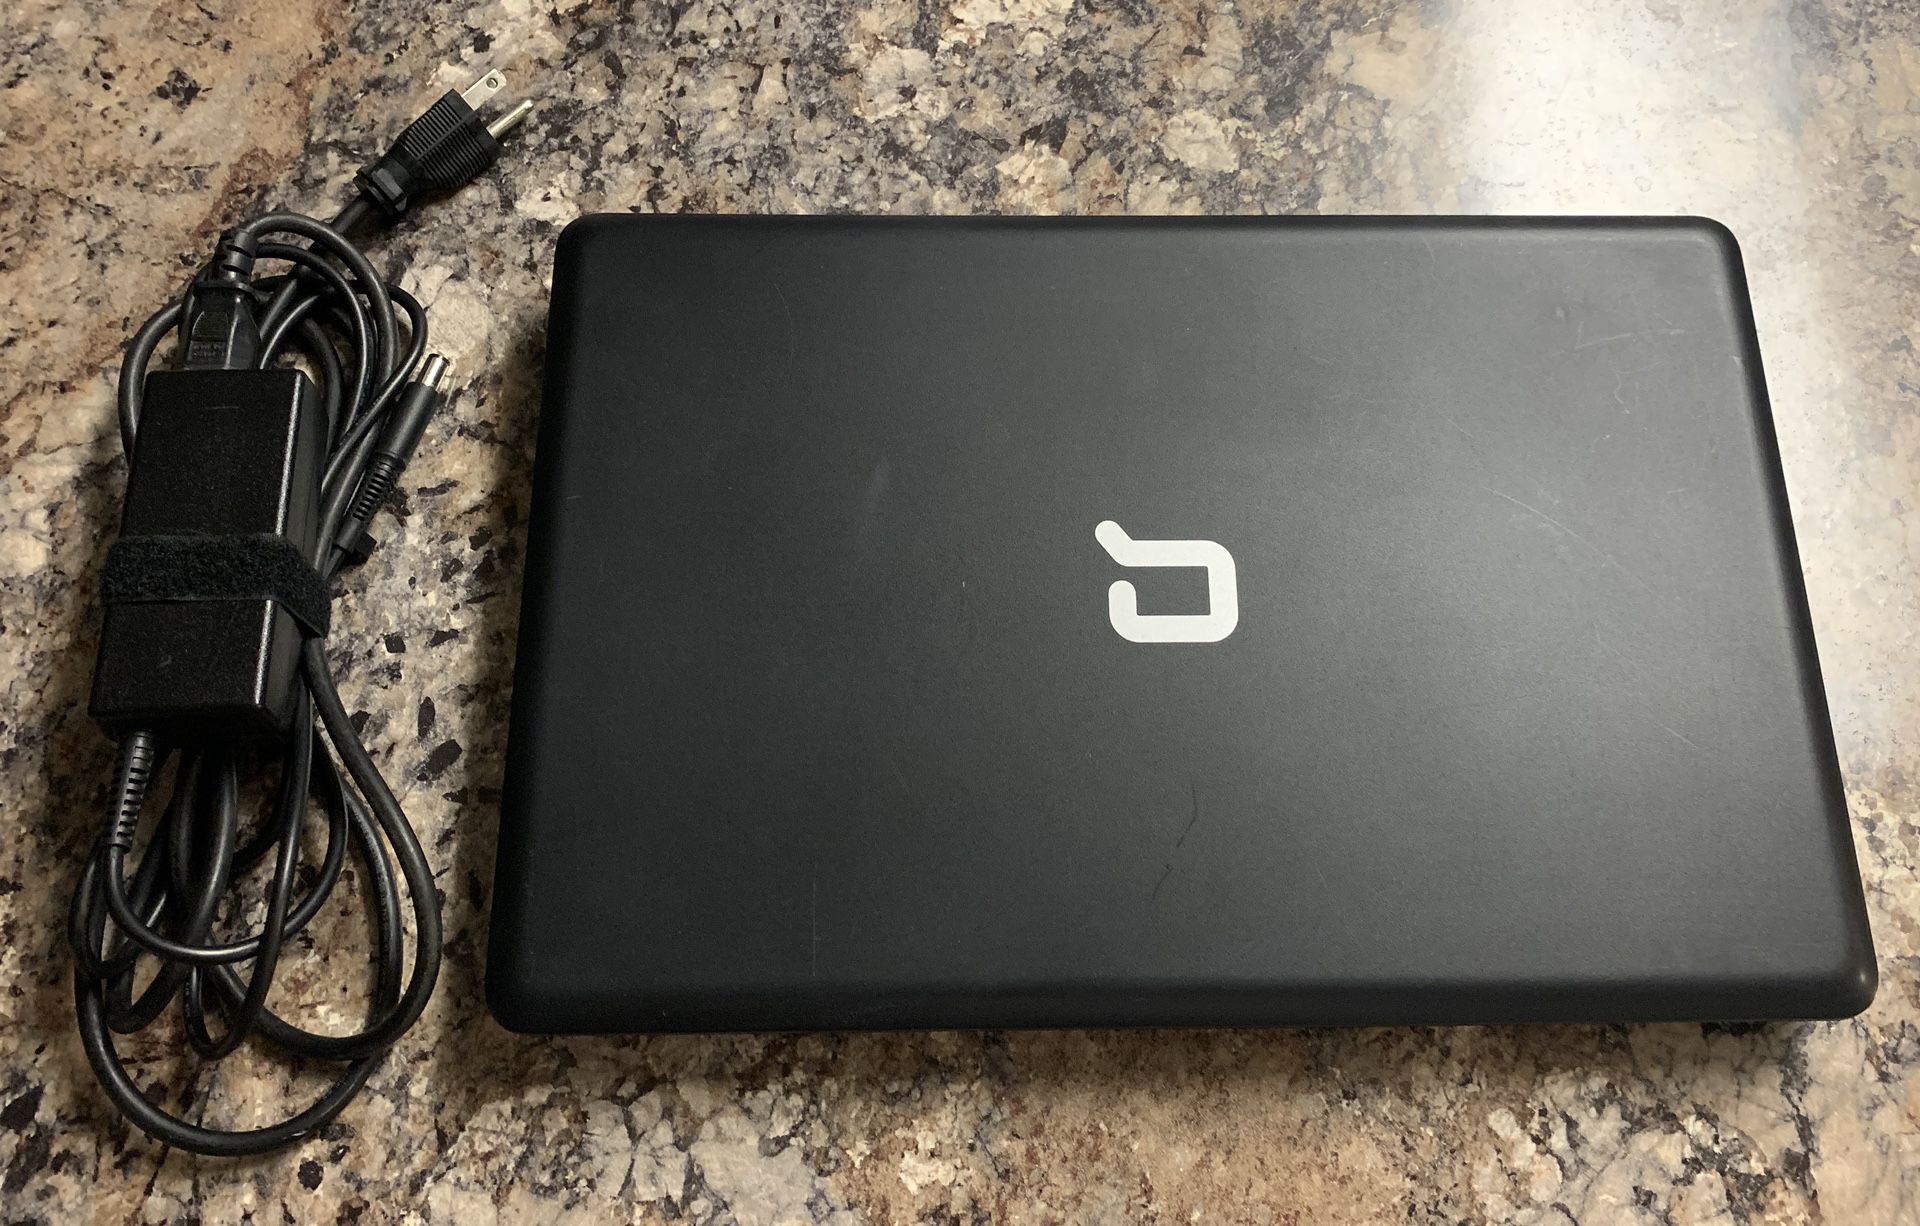 $ 119 - Compaq /HP - Windows 10 - Works Great - FREE DELIVERY